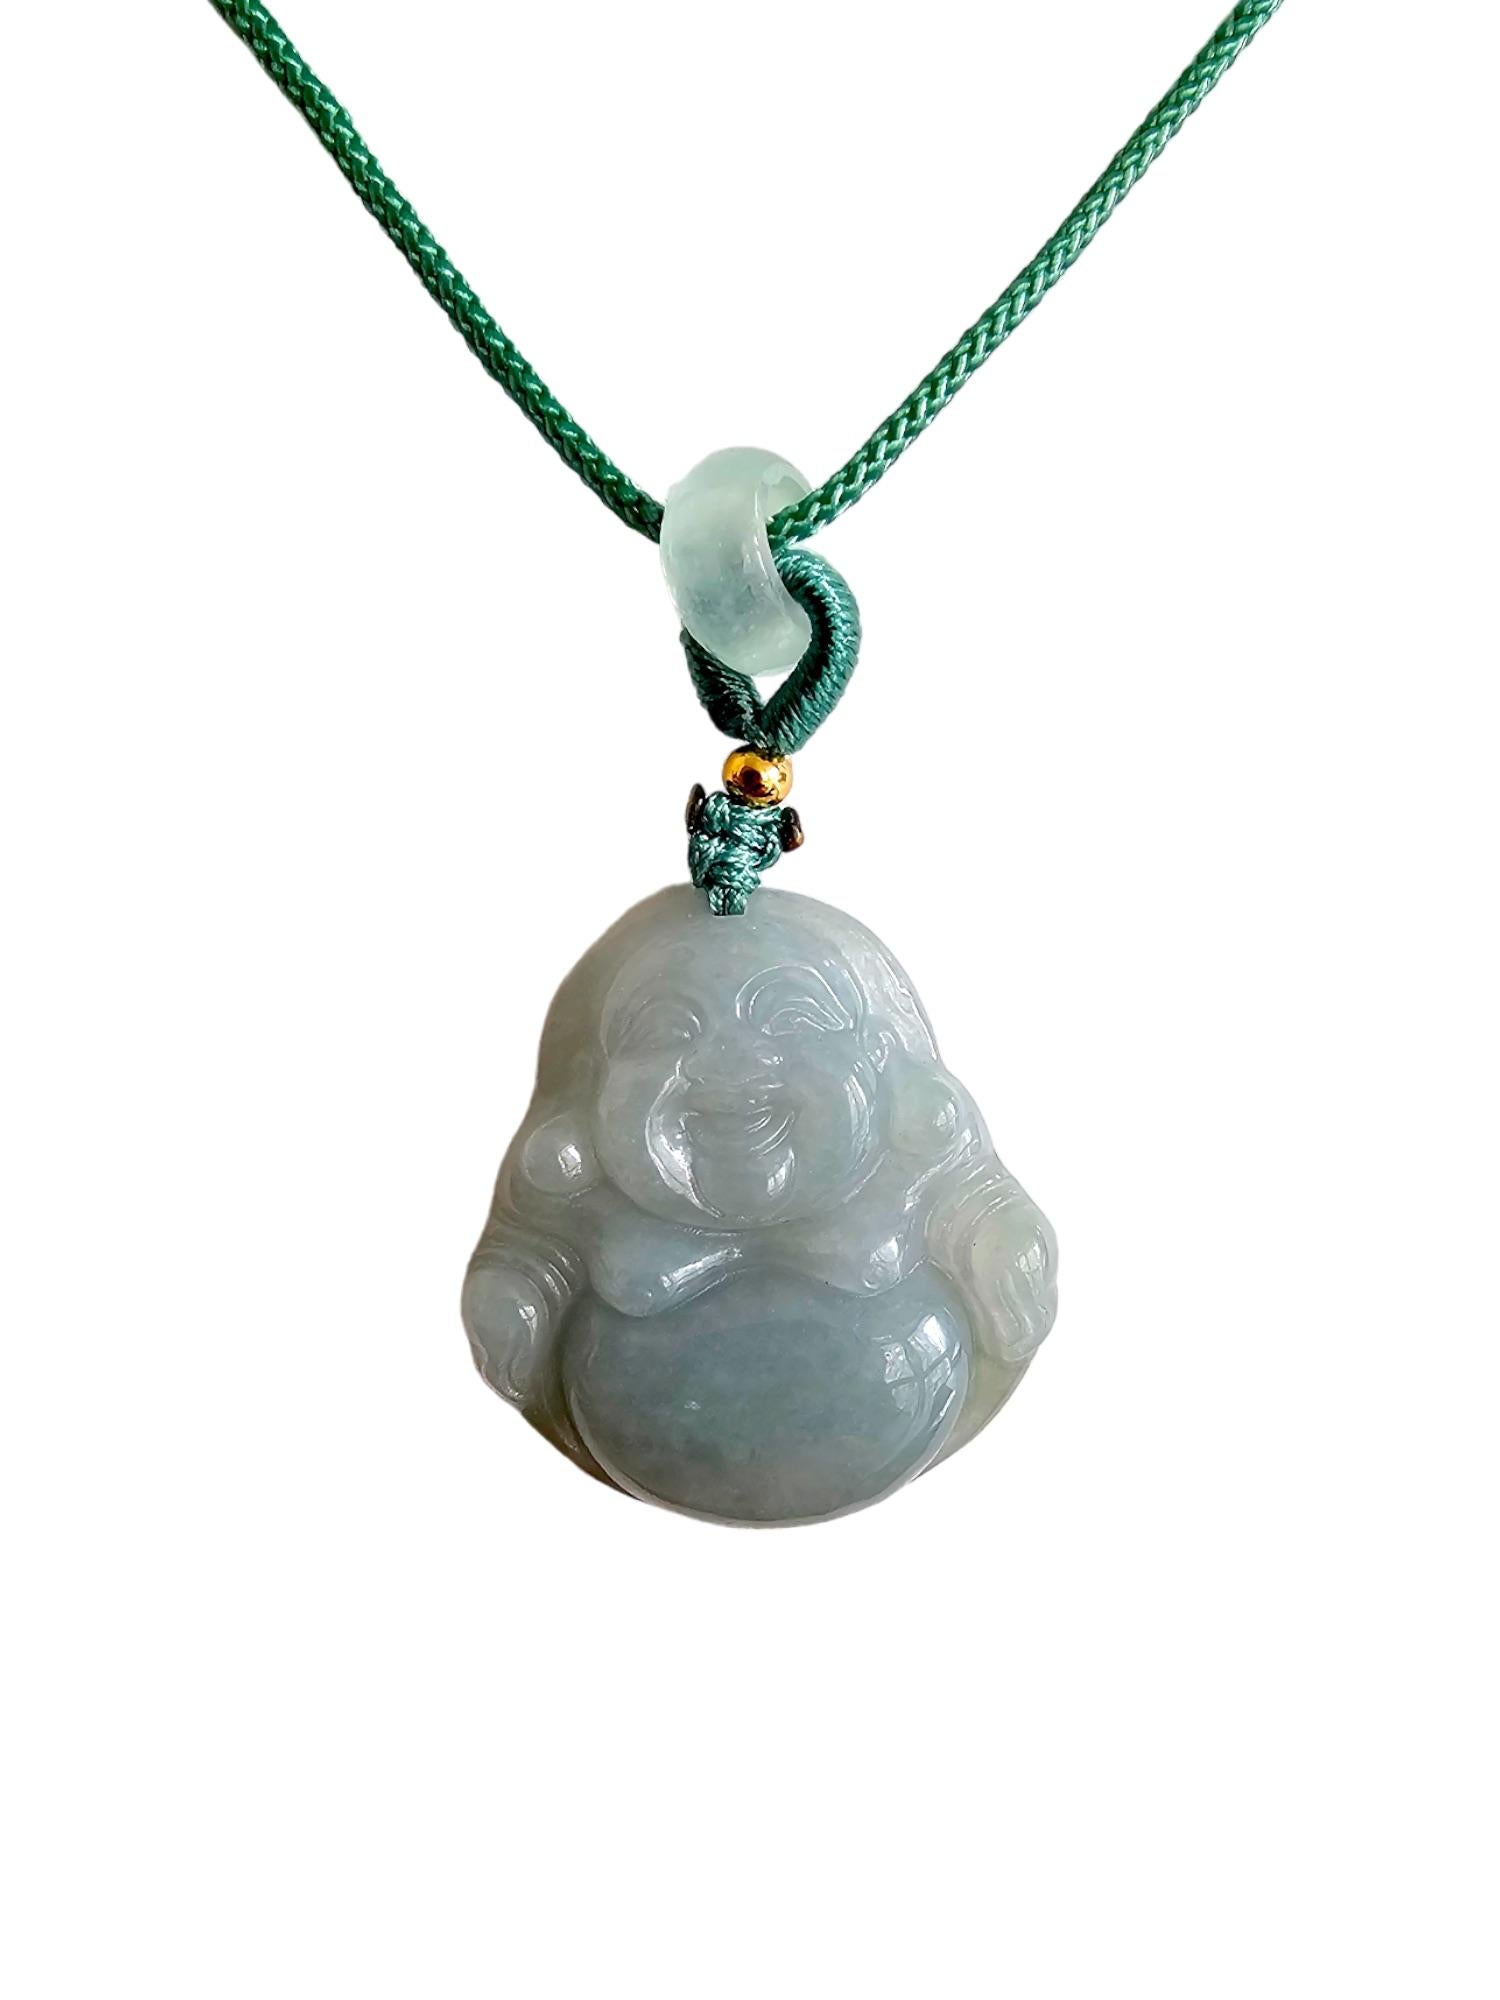 Sapporo Burmese Green A-Jadeite Big Laughing Buddha Pendant Necklace with FYORO String

Using Handpicked high translucency and carved natural Burmese A-Jadeite. We created a Big Laughing Buddha design with inspiration notes from Sapporo, Japan. We